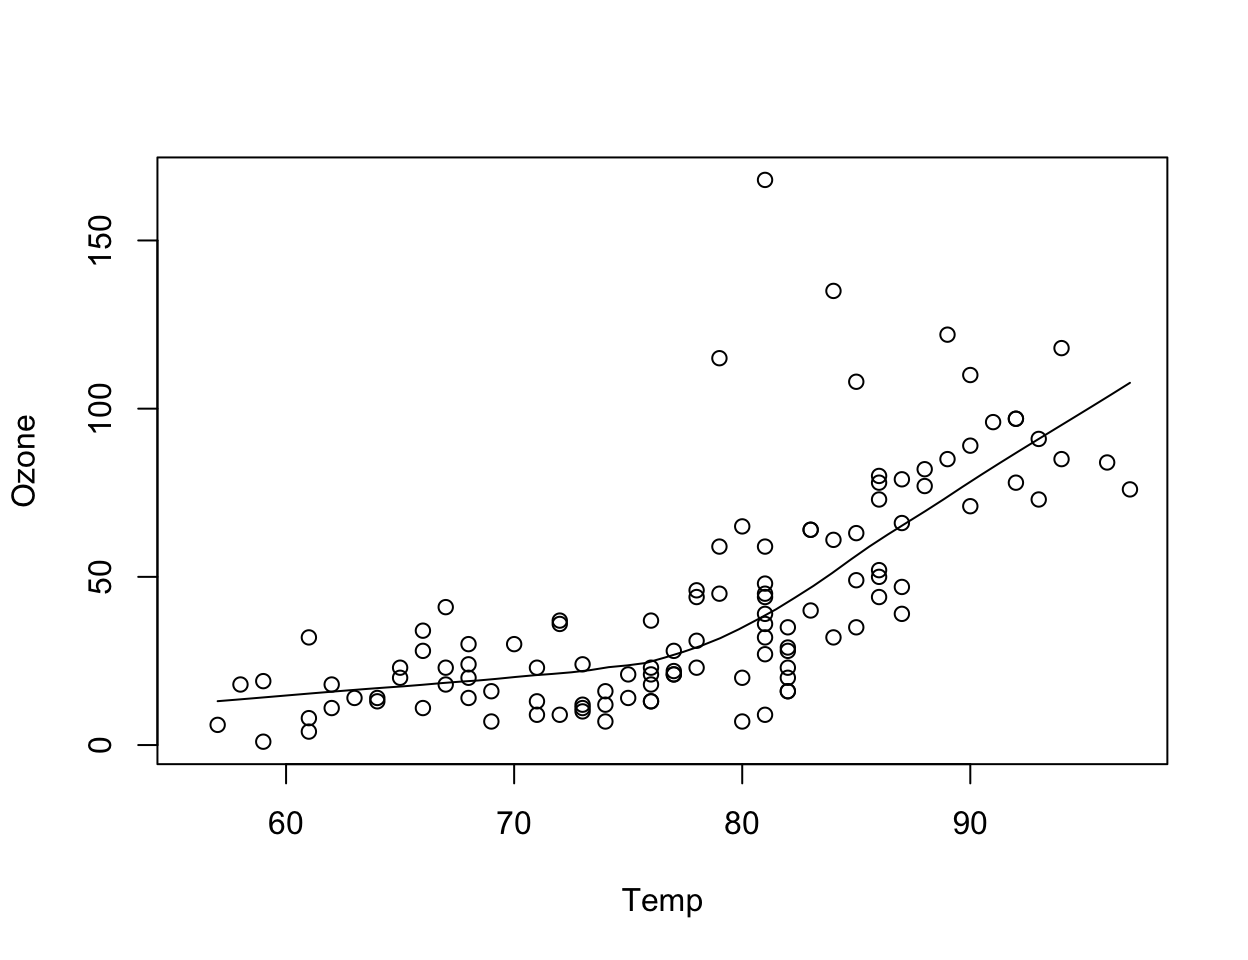 Scatterplot of Temperature and Ozone in New York (base graphics)